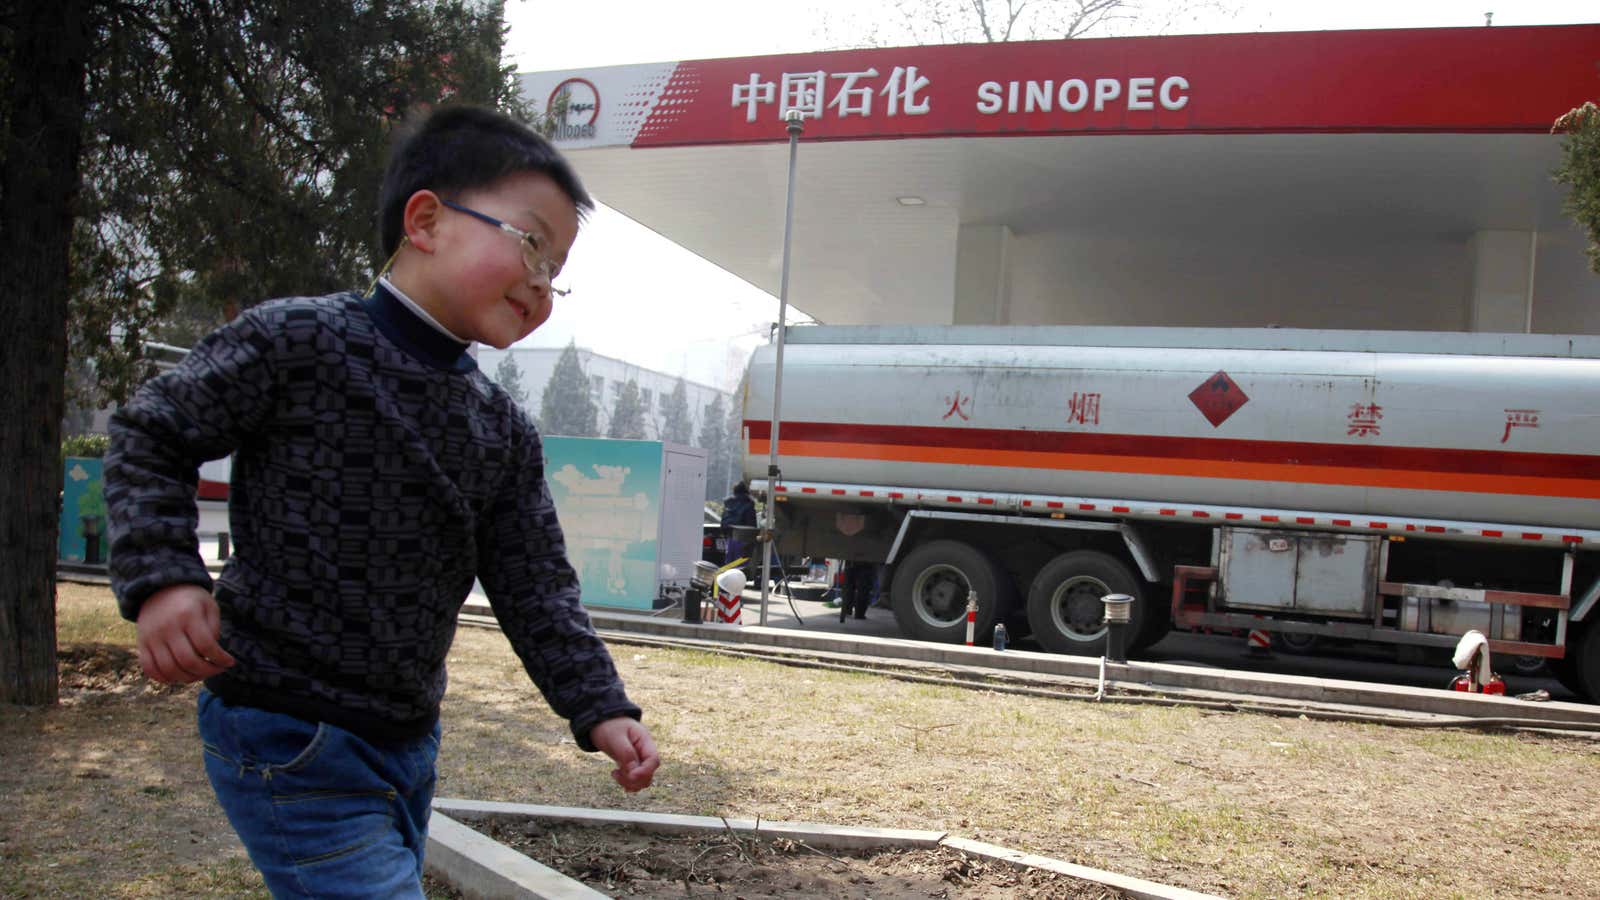 China’s gas prices aren’t anything to smile about.